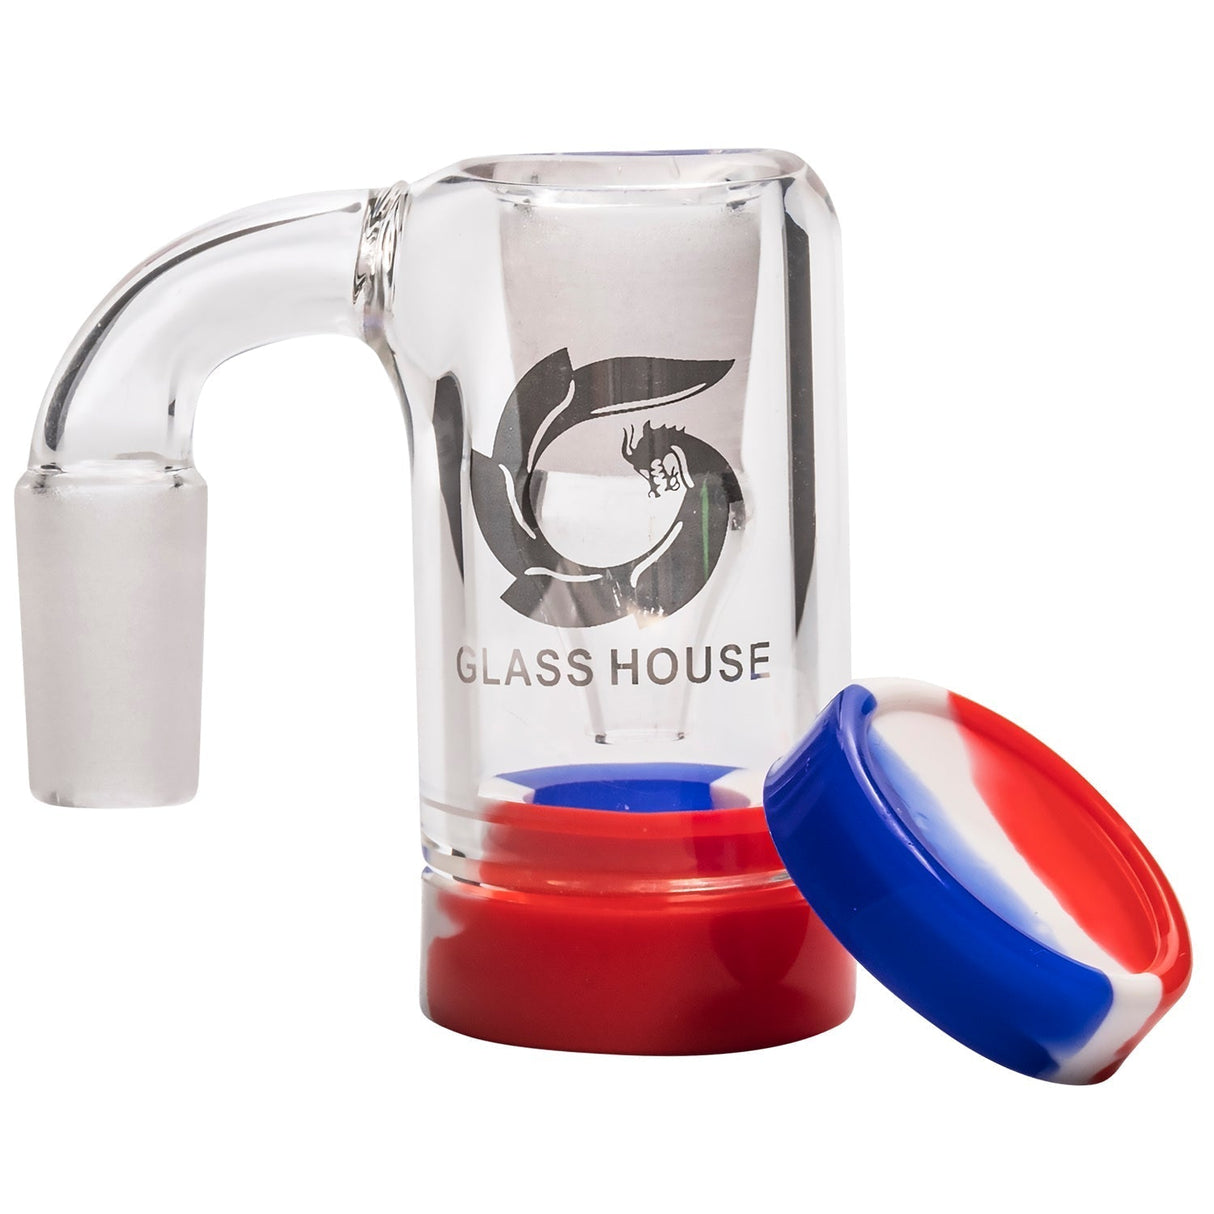 Glasshouse Quartz Reclaim Kit with Male Joint and 90 Degree Angle, Including 2 Silicone Dishes